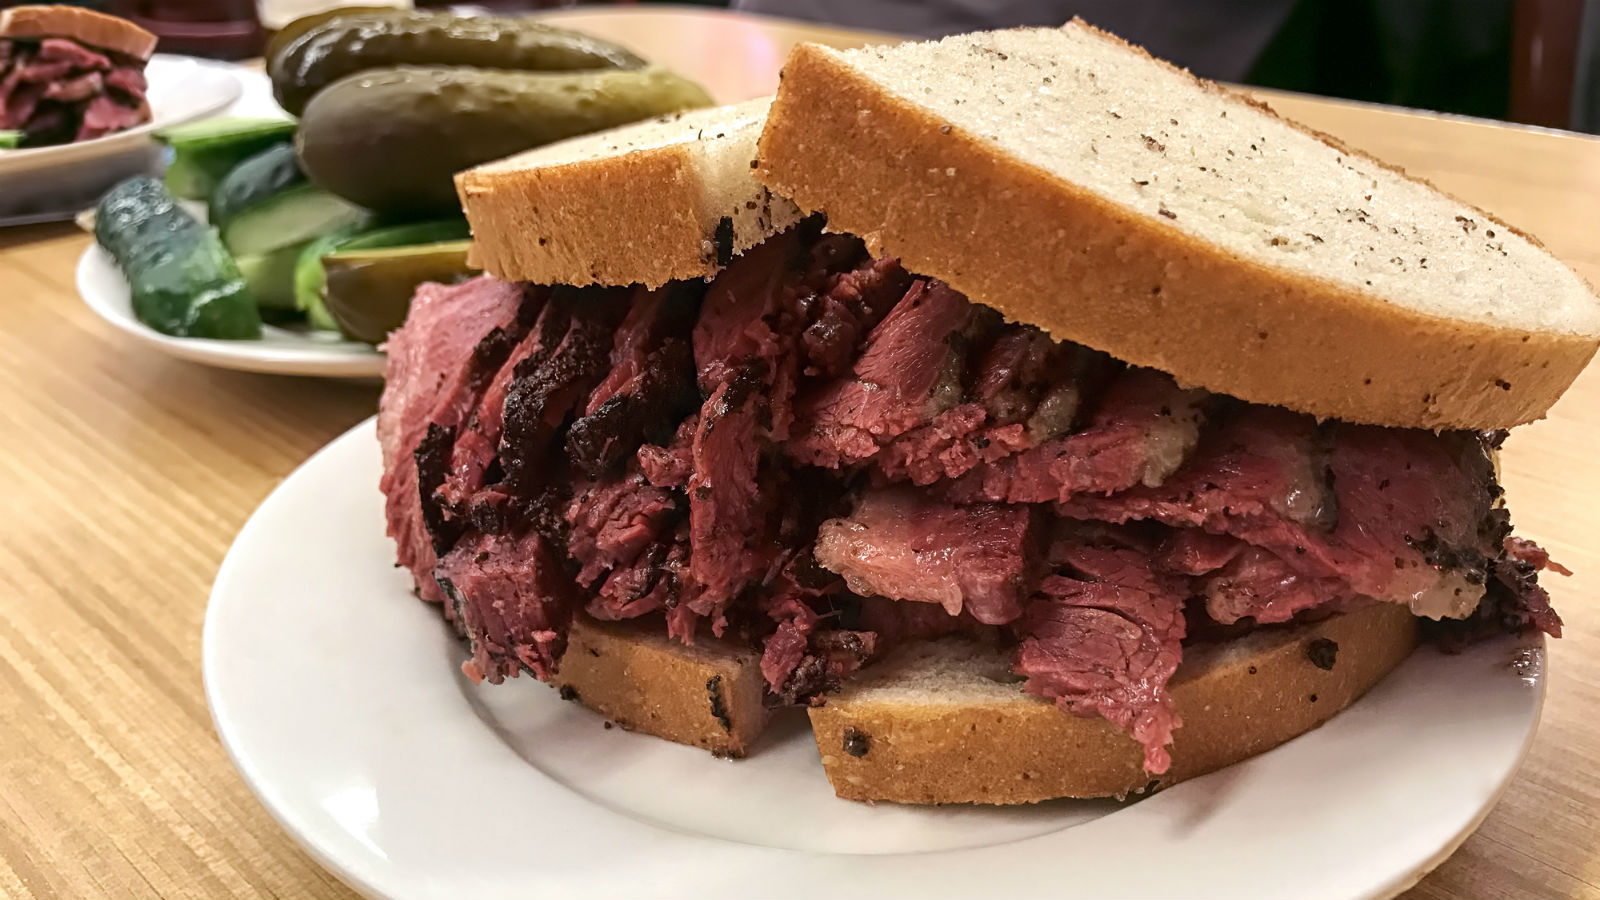 Katz's Deli is Taking Their Iconic Sandwiches on the Road The Nosher.